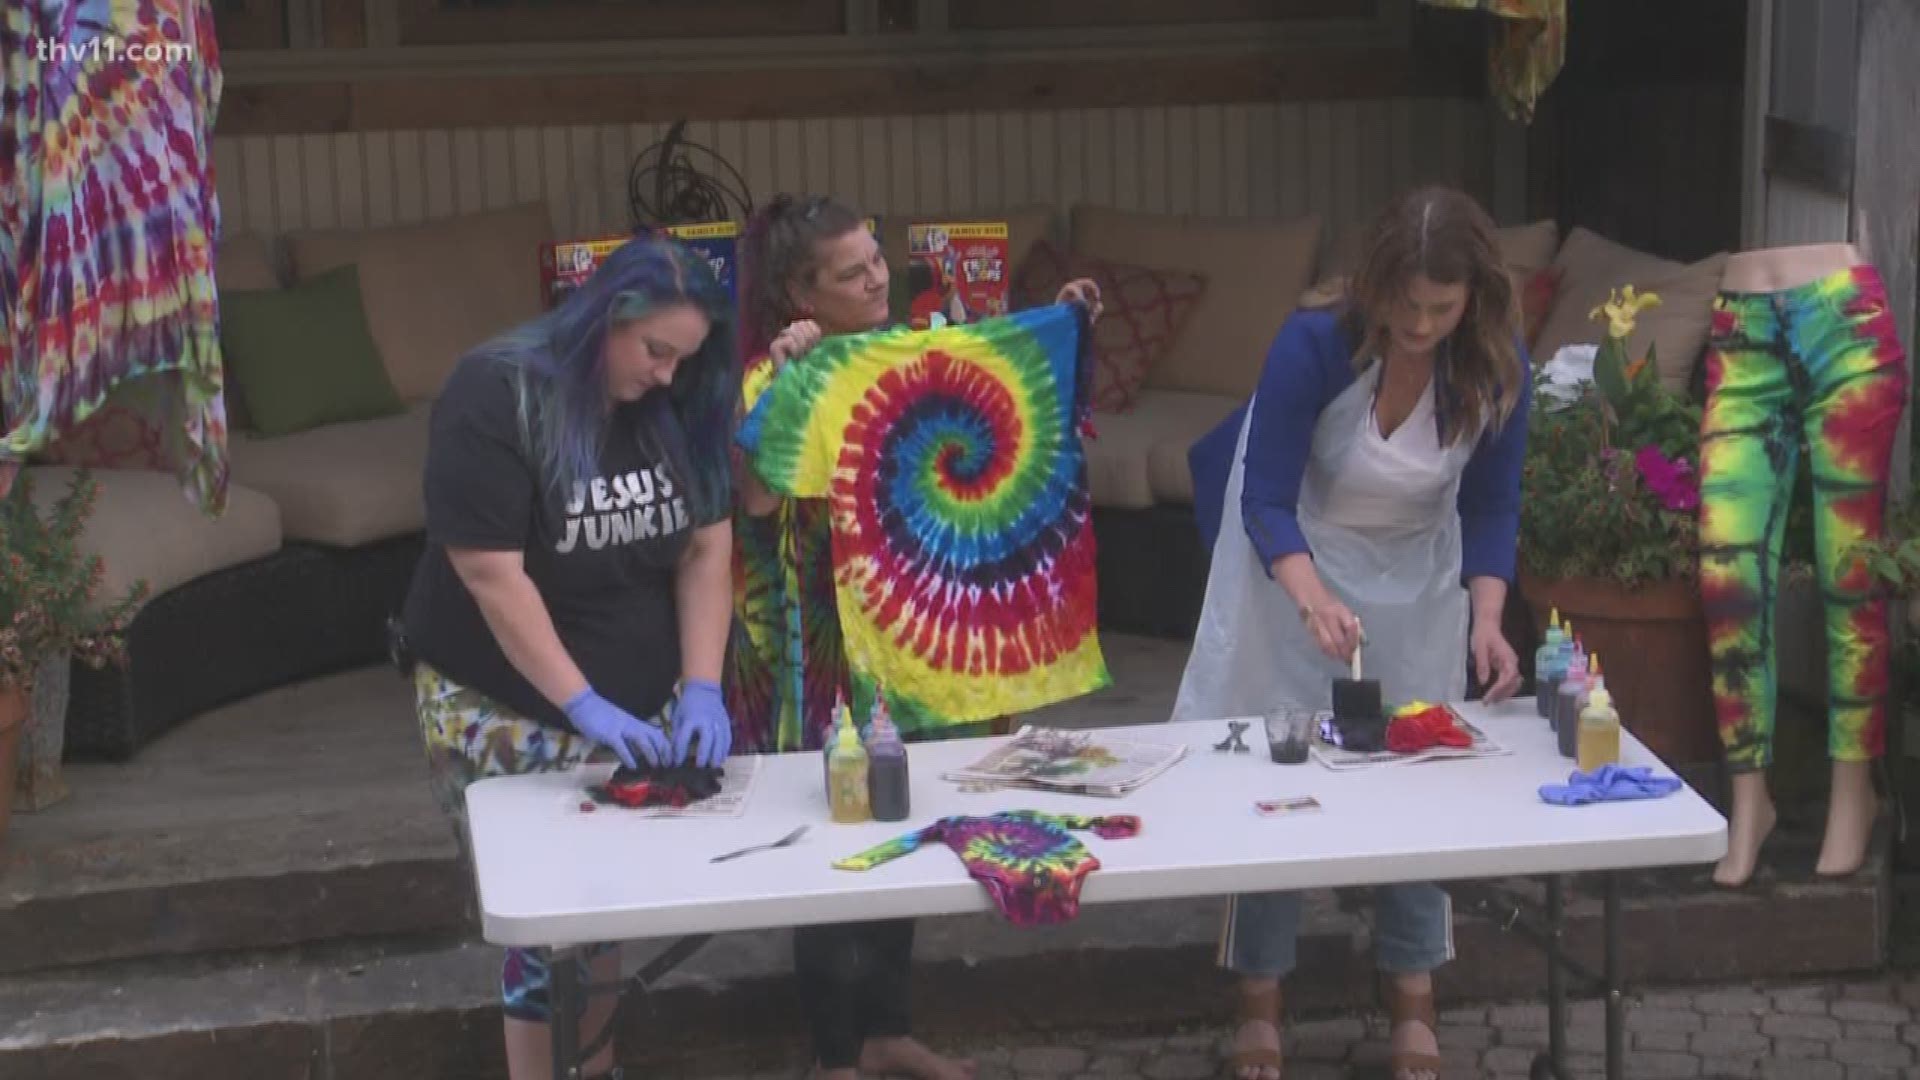 Ashley continued visiting with Next Generation Tye-Dyes about how to create your very own tye-dye clothes for the summer.  If Ashley can do it, anyone can. - Adam